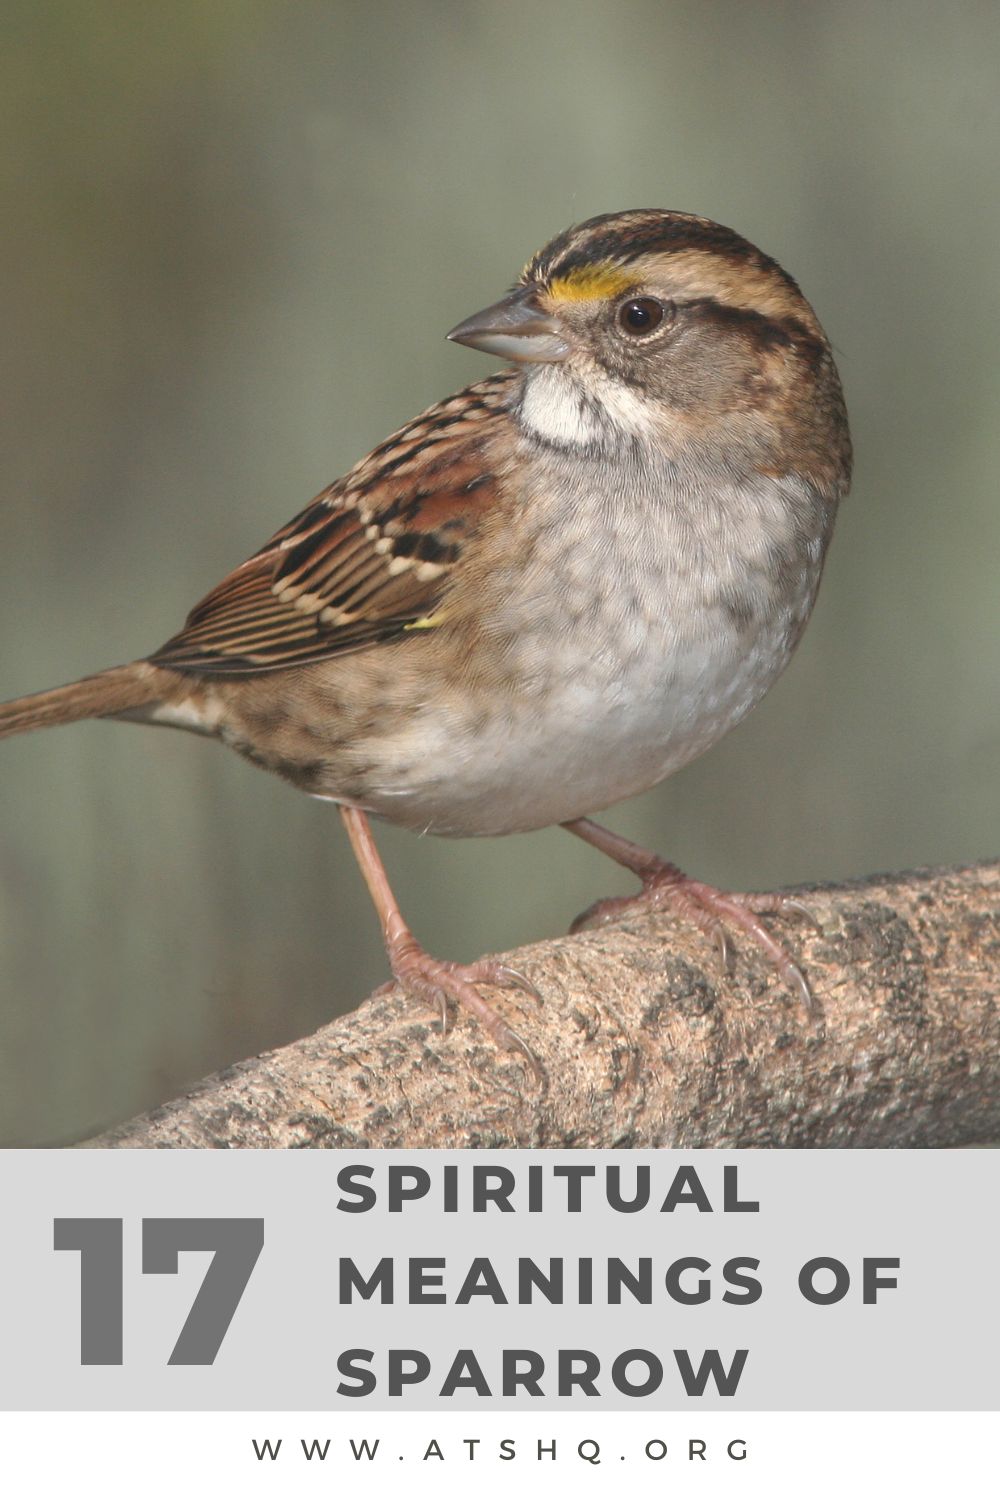 17 Spiritual Meanings of Sparrow